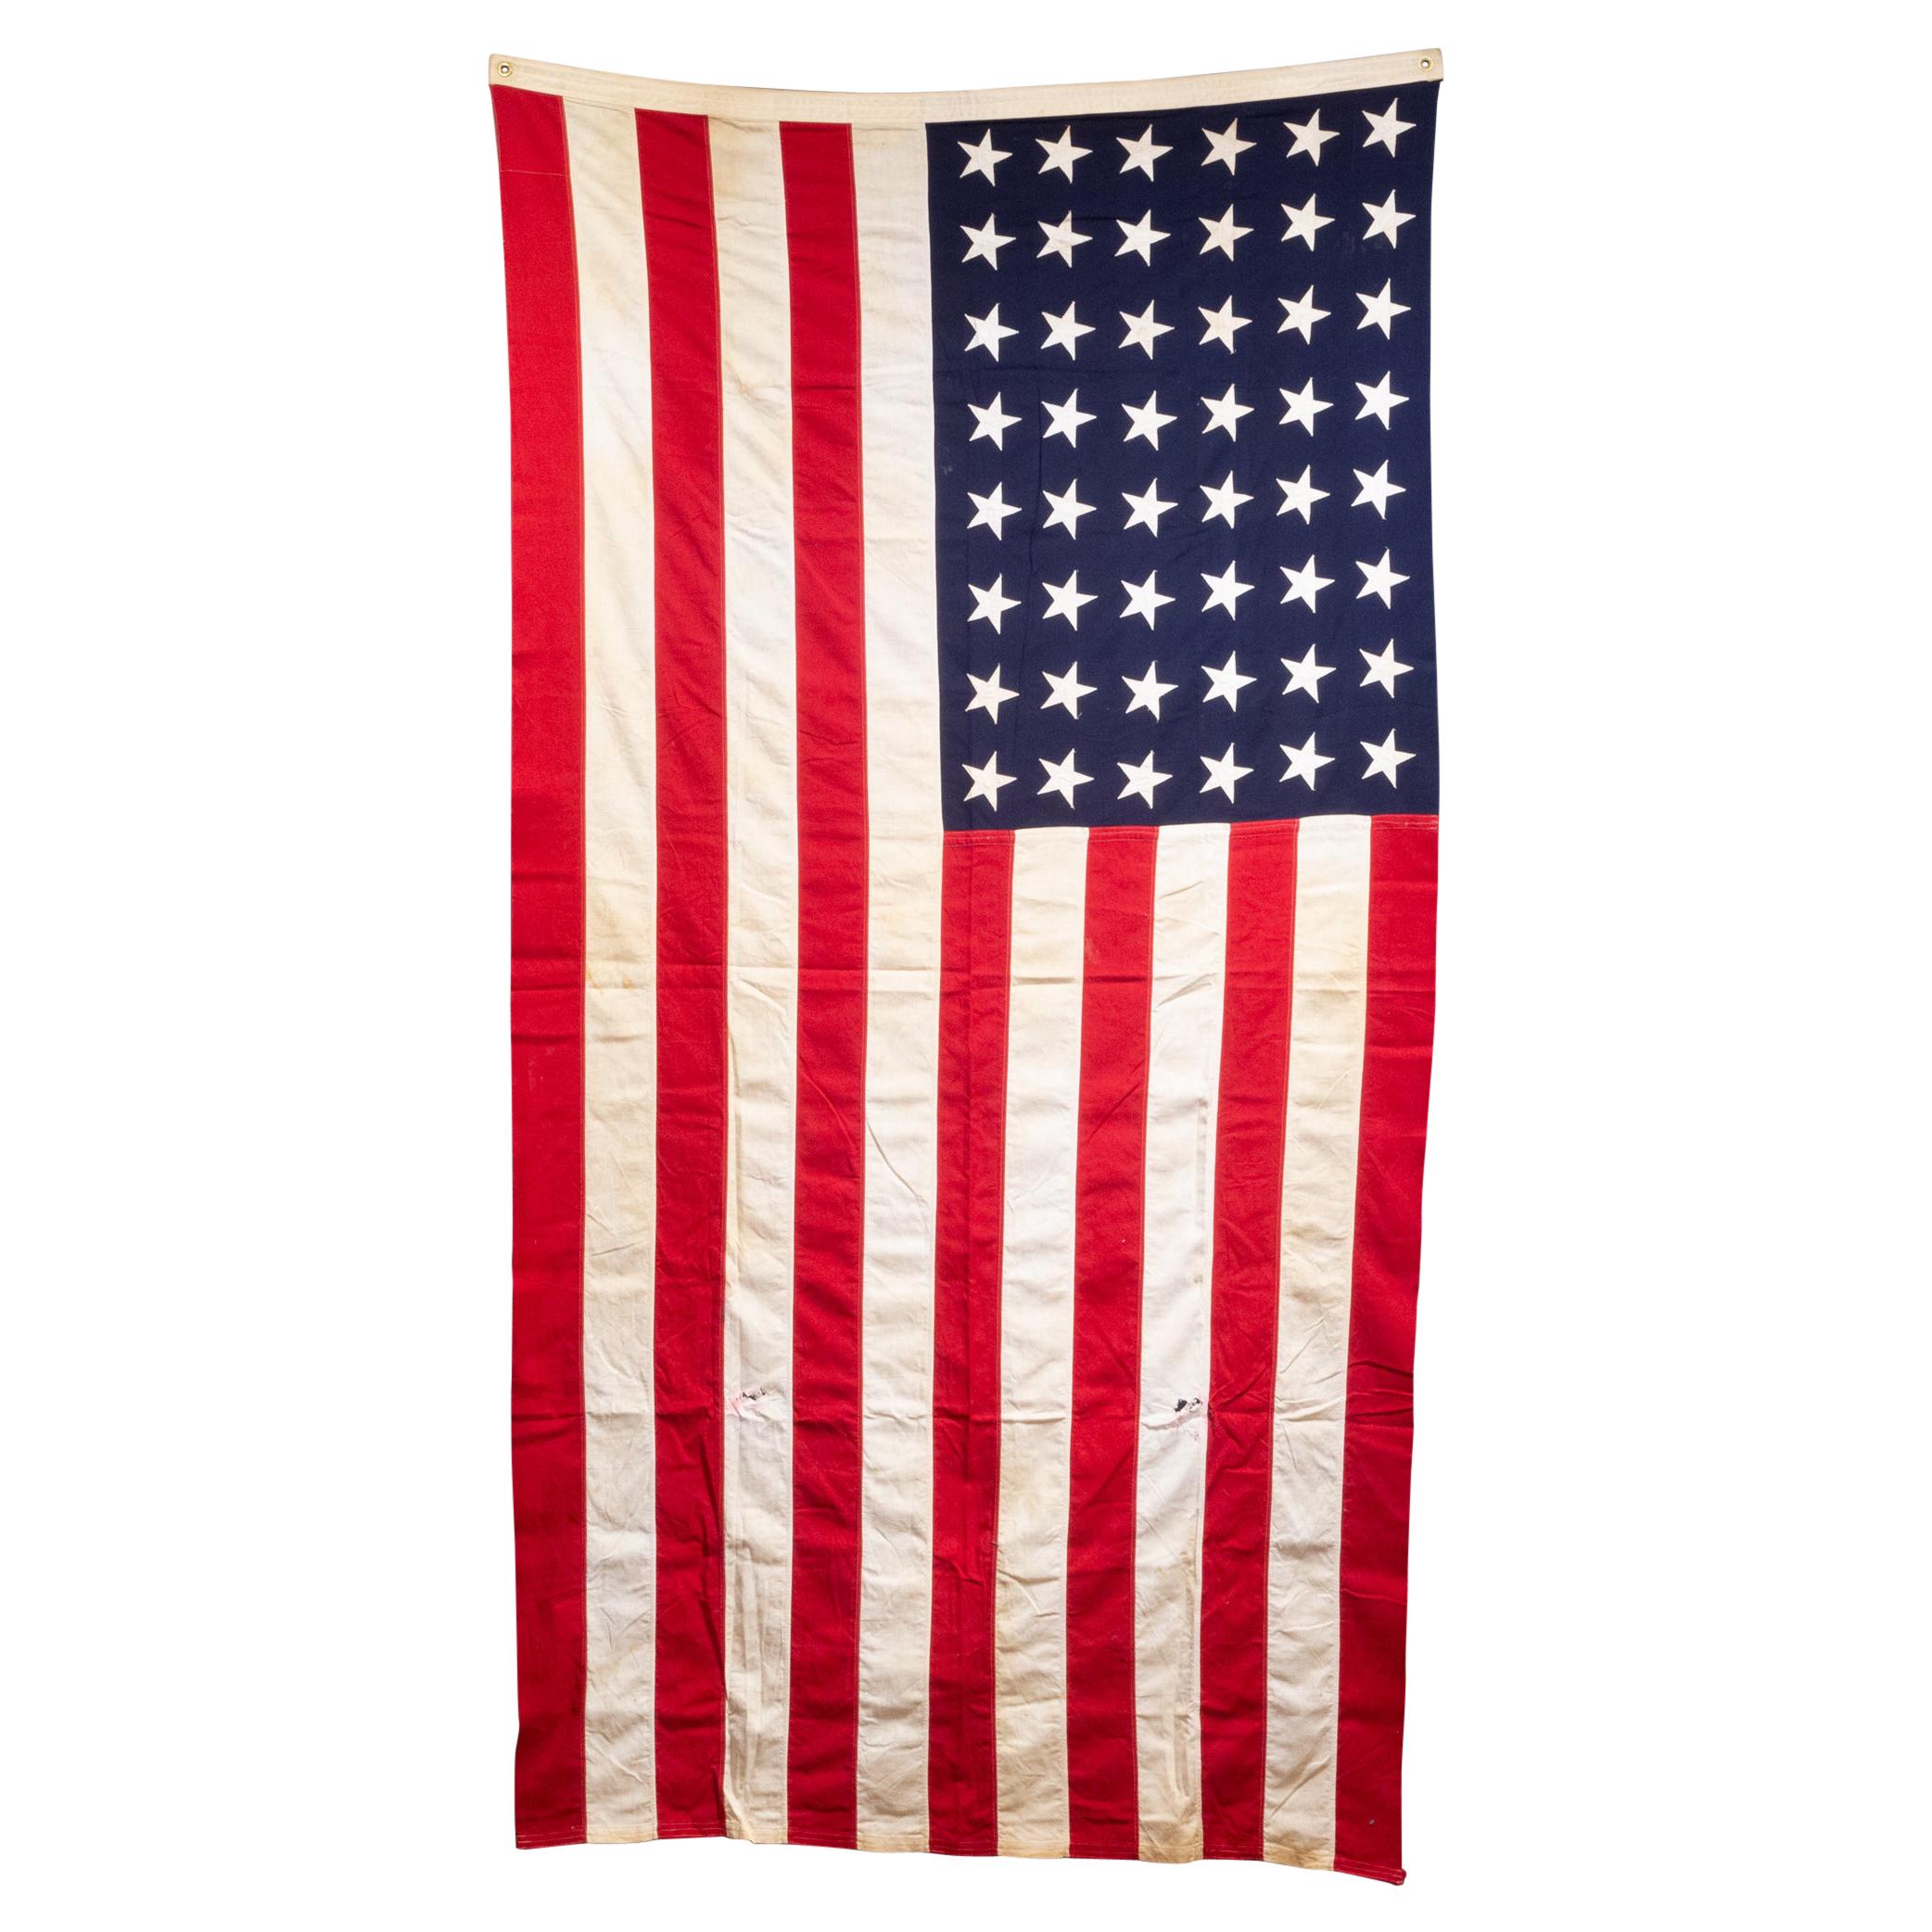 Early 20th C. Monumental American Flag with 48 Stars, c.1940-1950